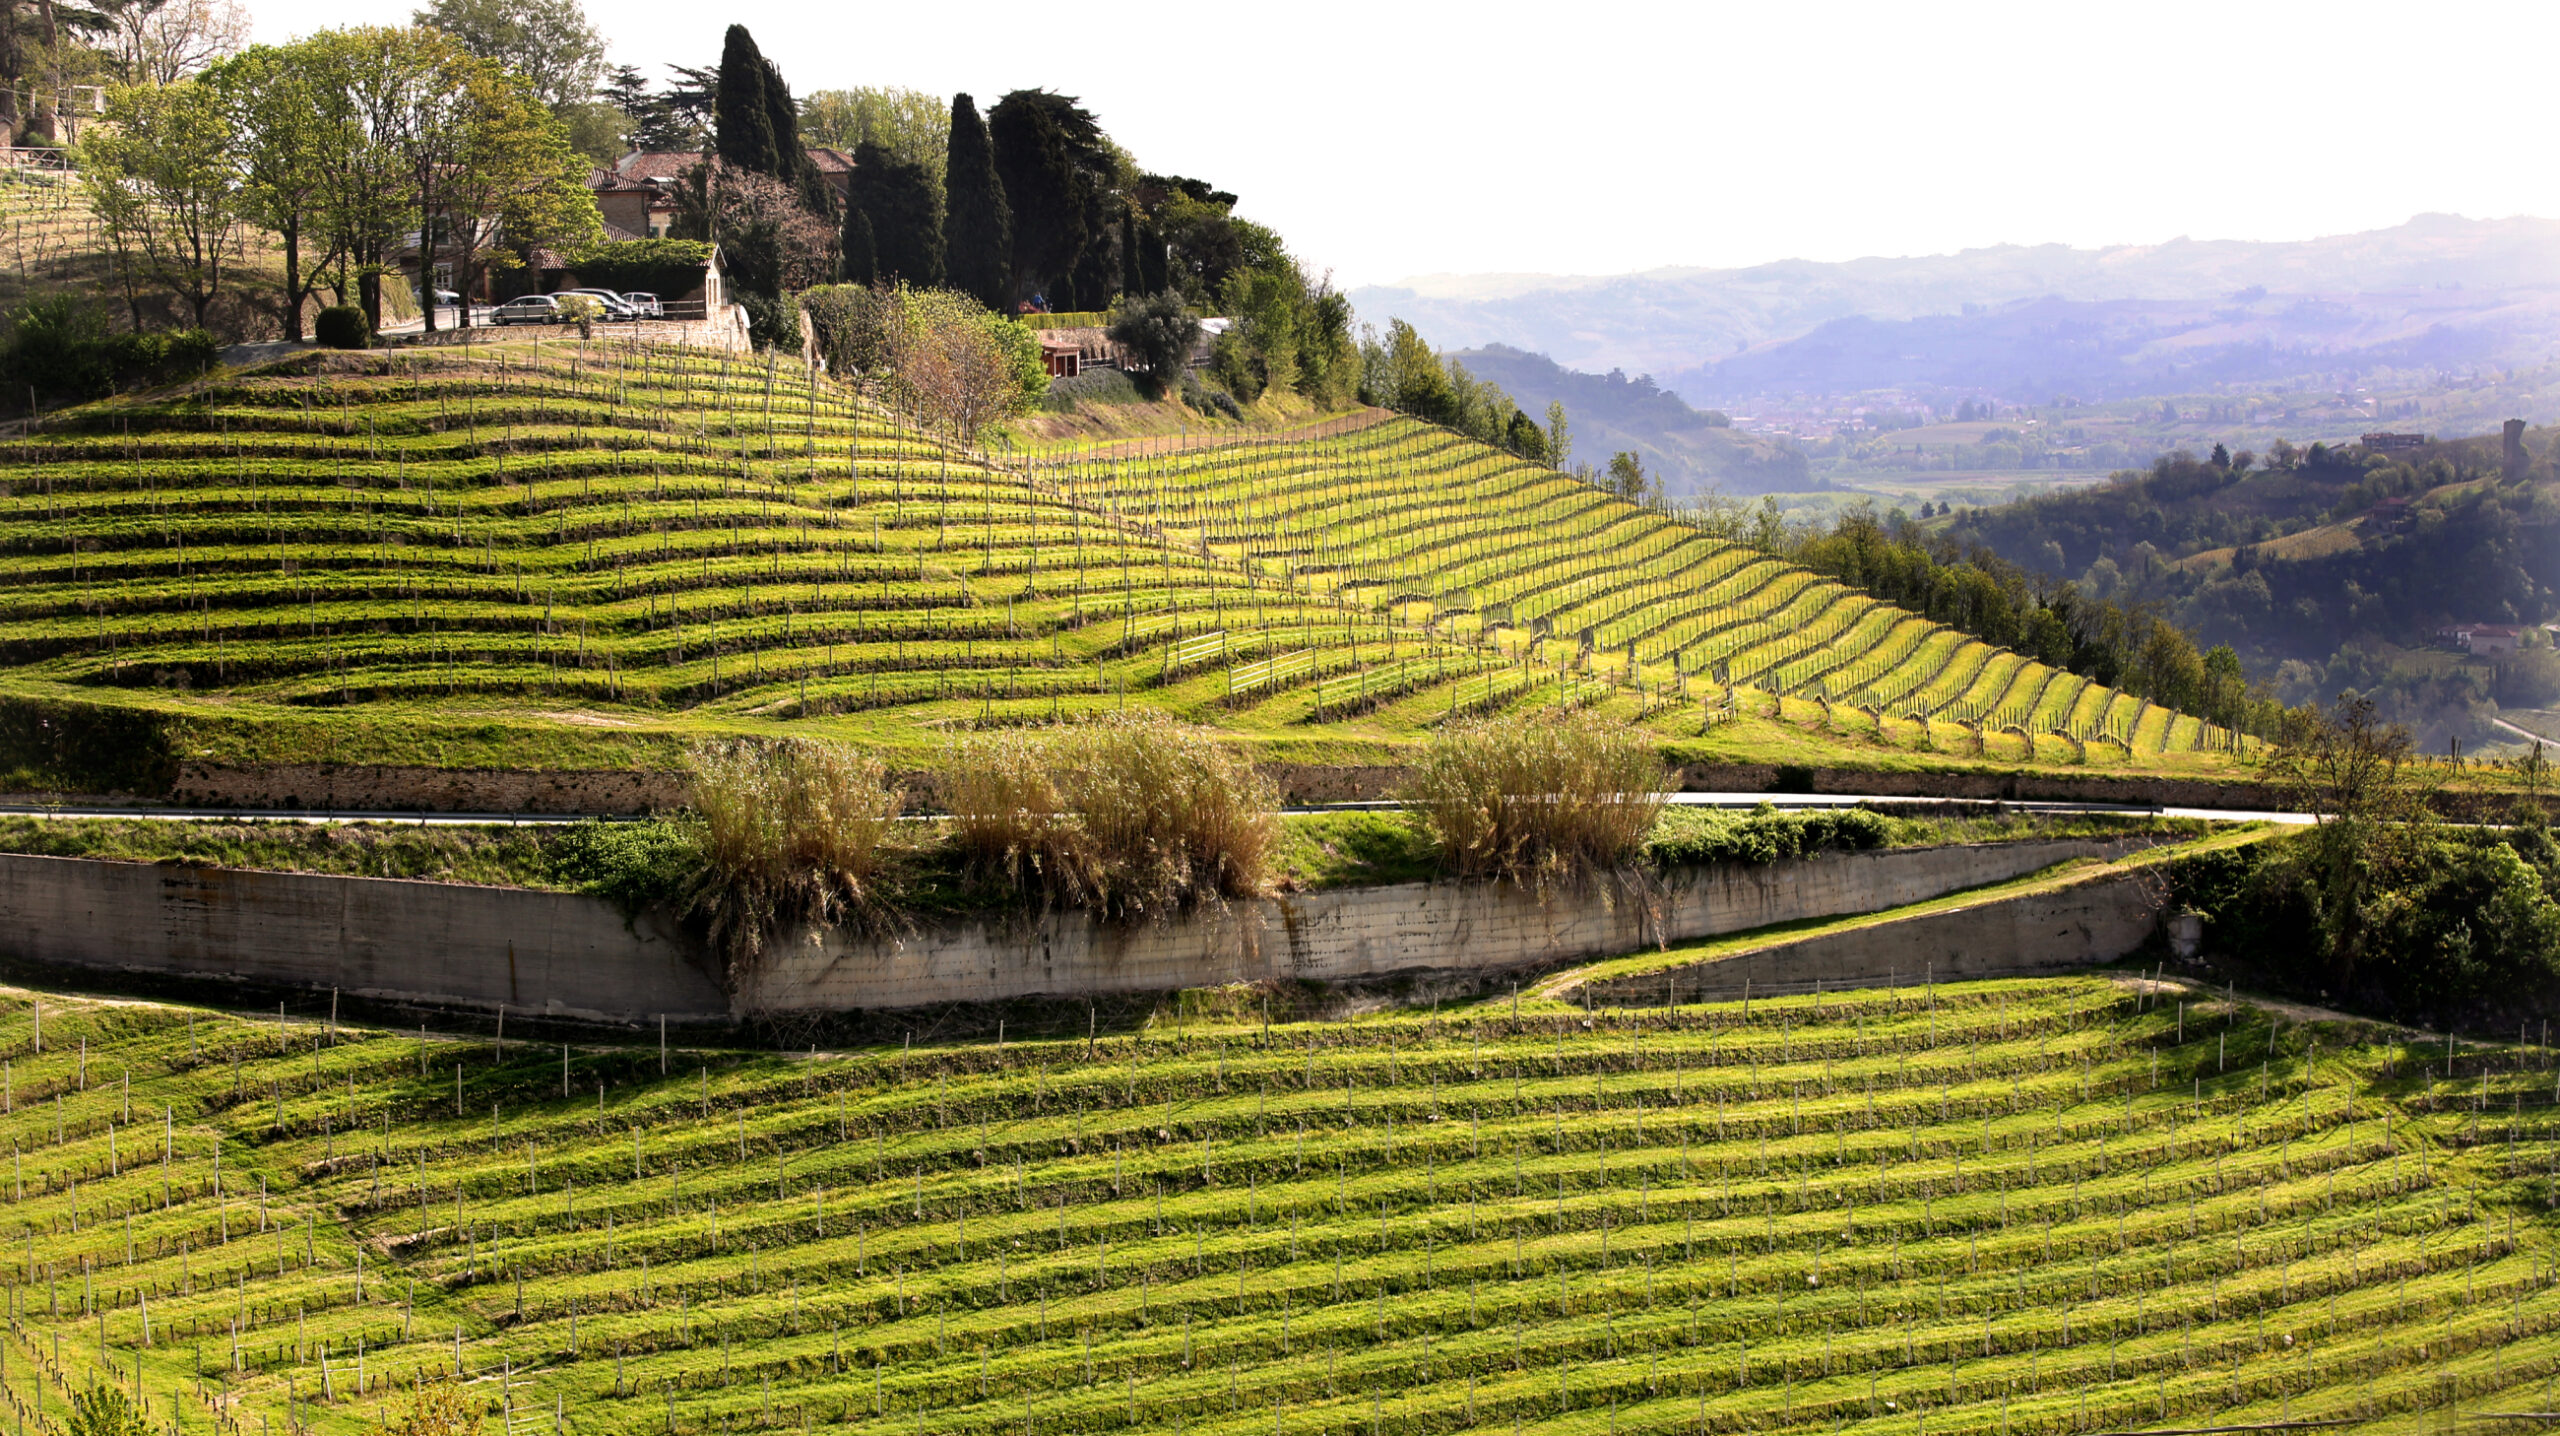 Beautiful hilly vineyards of Ceretto winery